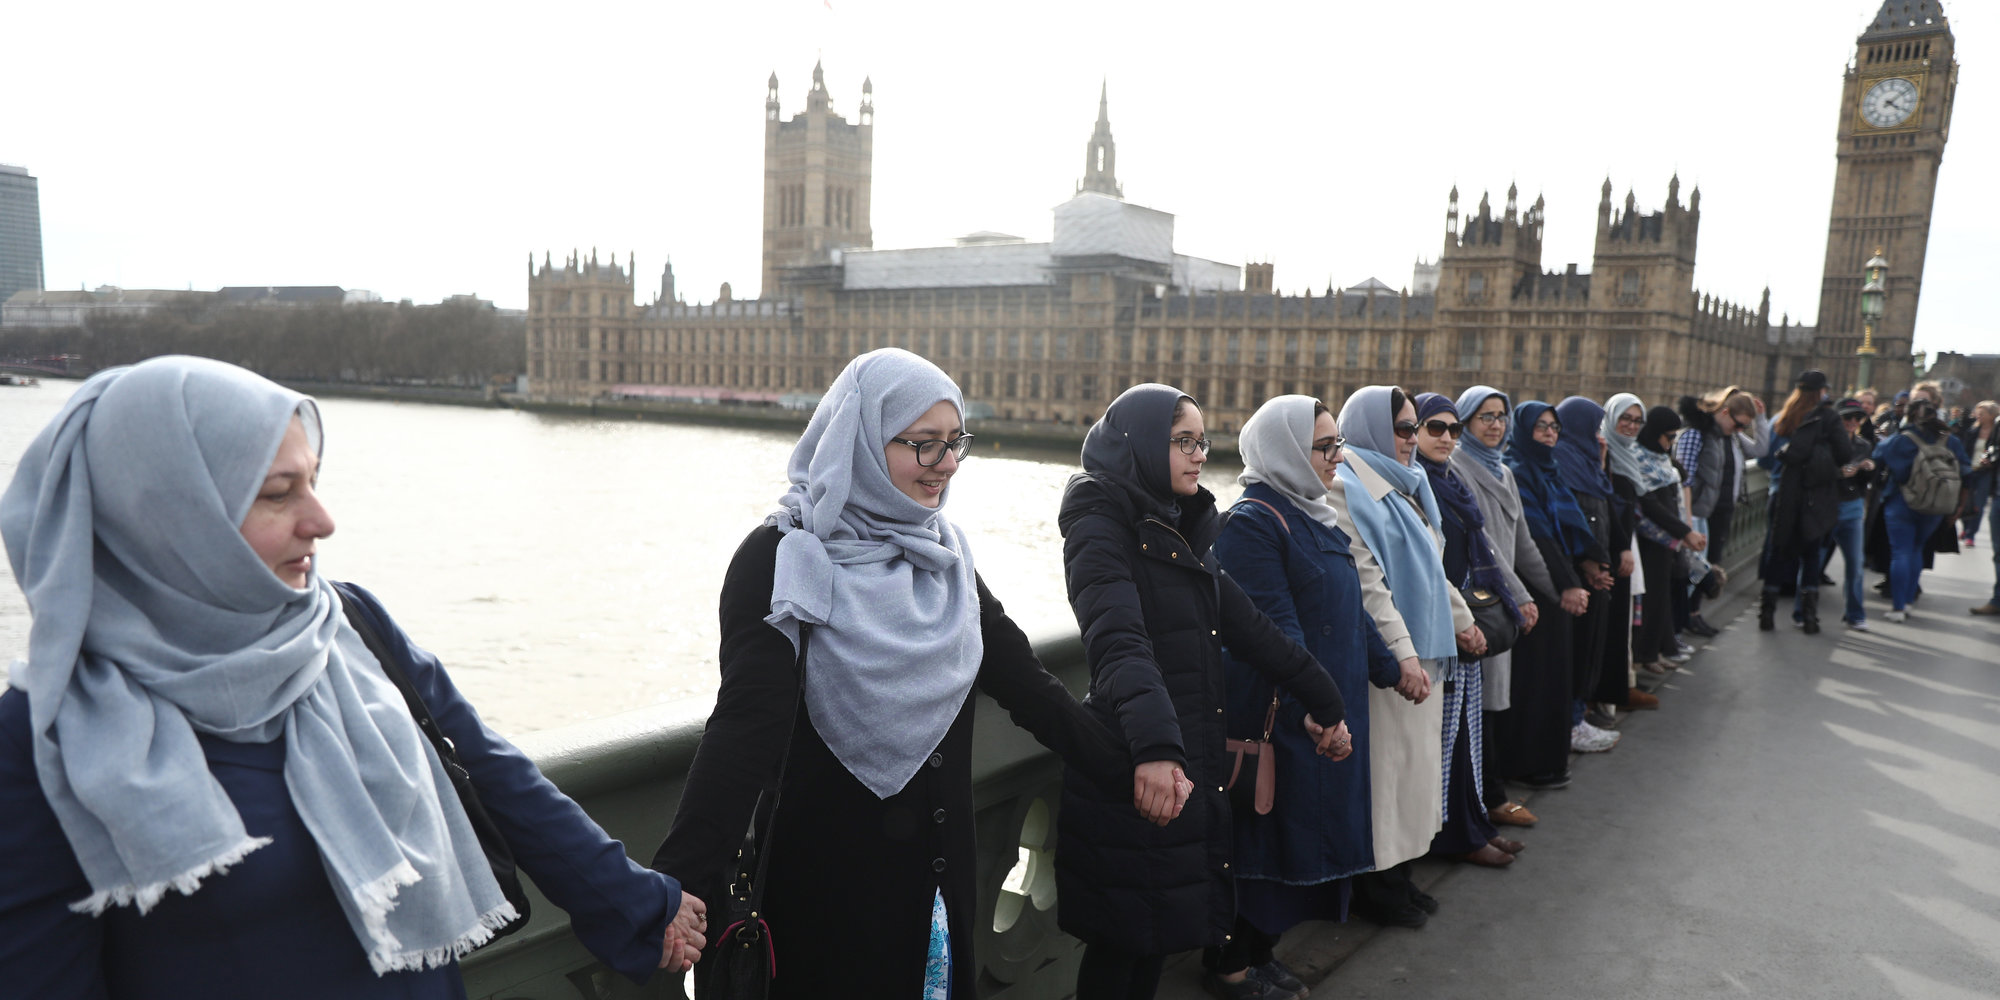 What Is It Like To Be Young, Female And Muslim?